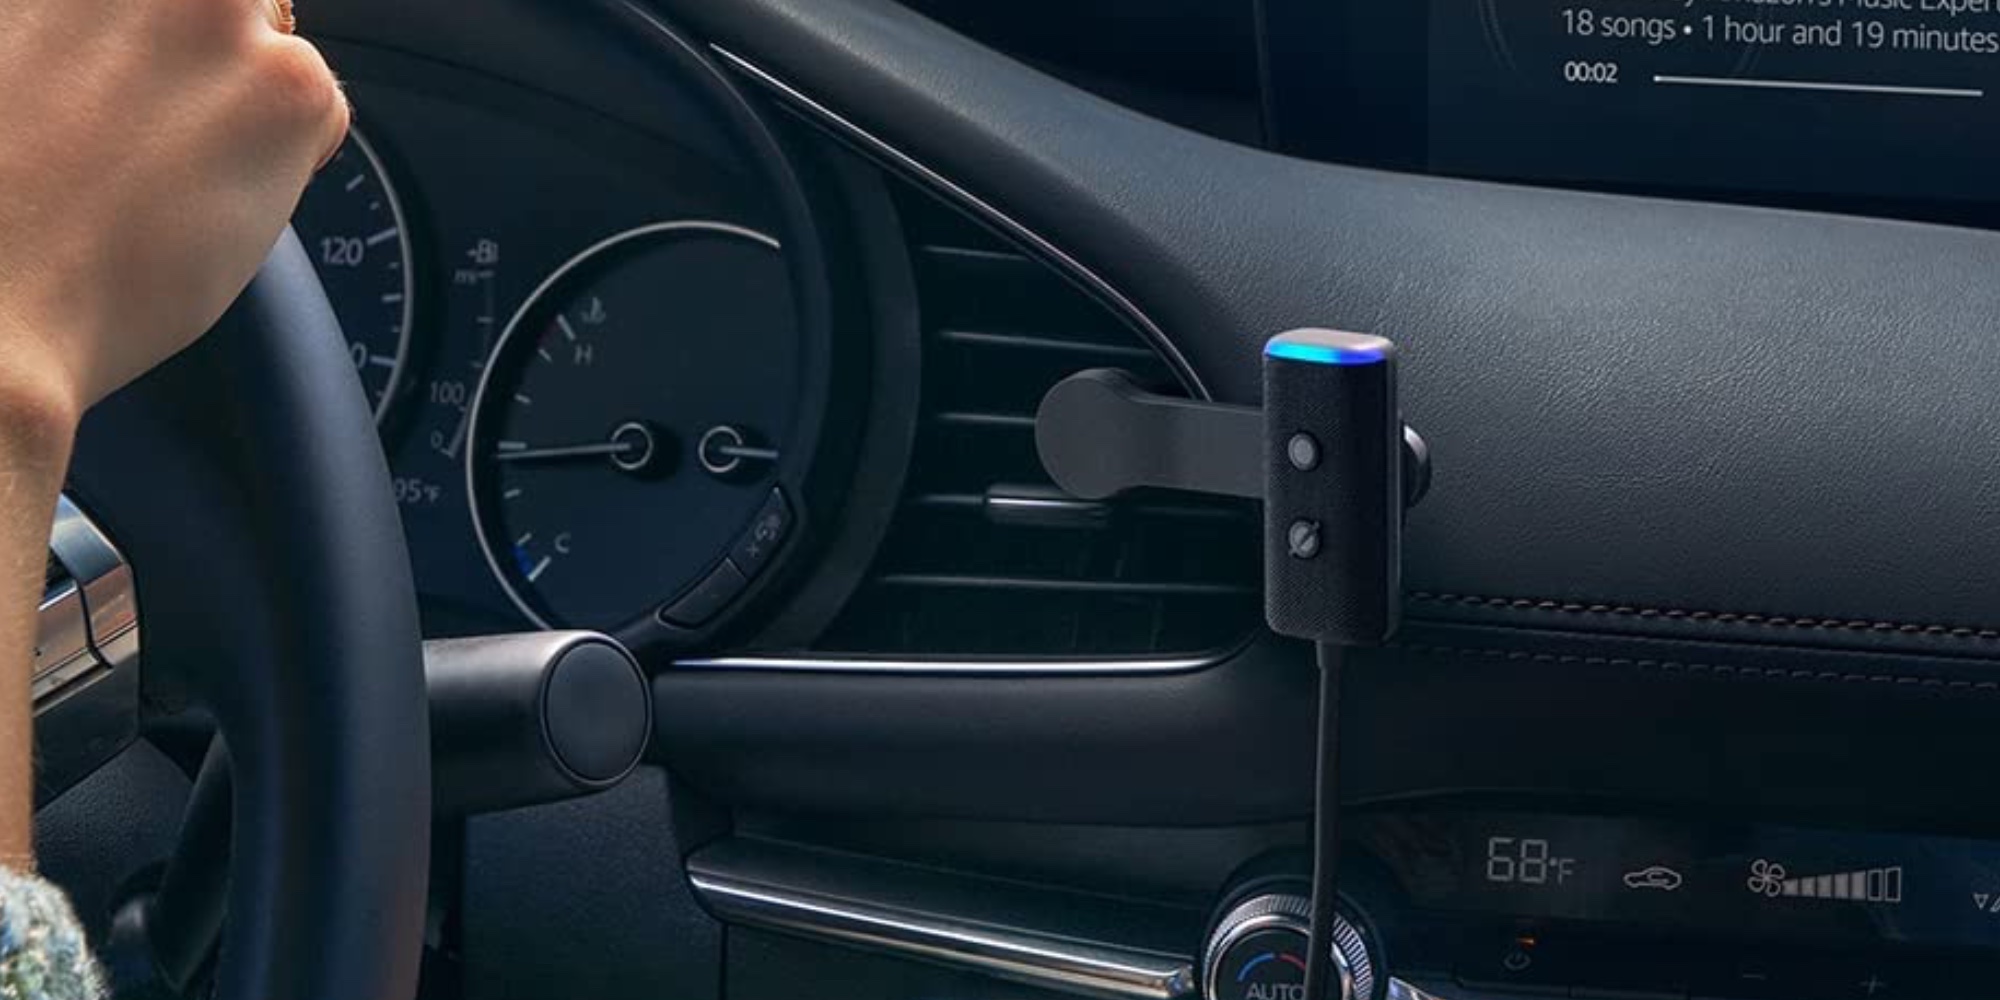 Echo Auto review: Alexa goes on a road trip